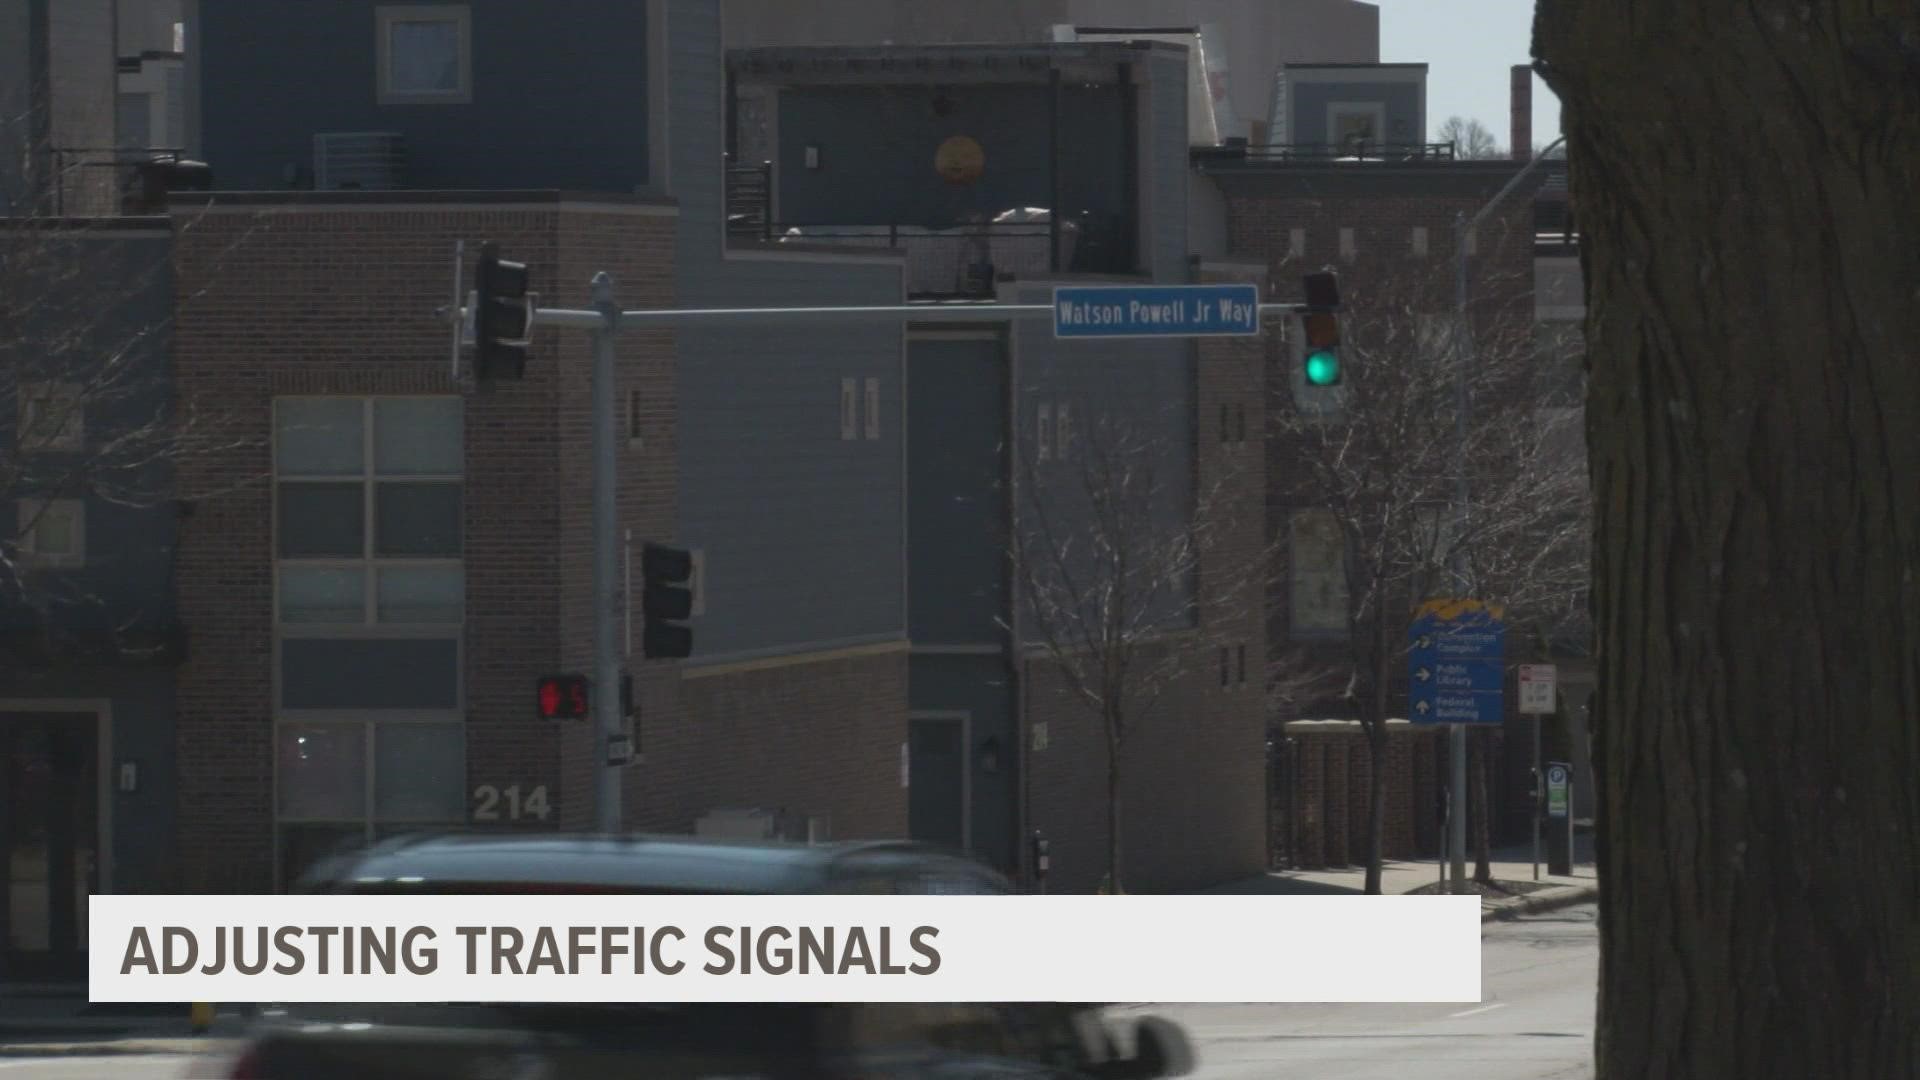 The city of Des Moines is now in phase three of five in its retiming project.